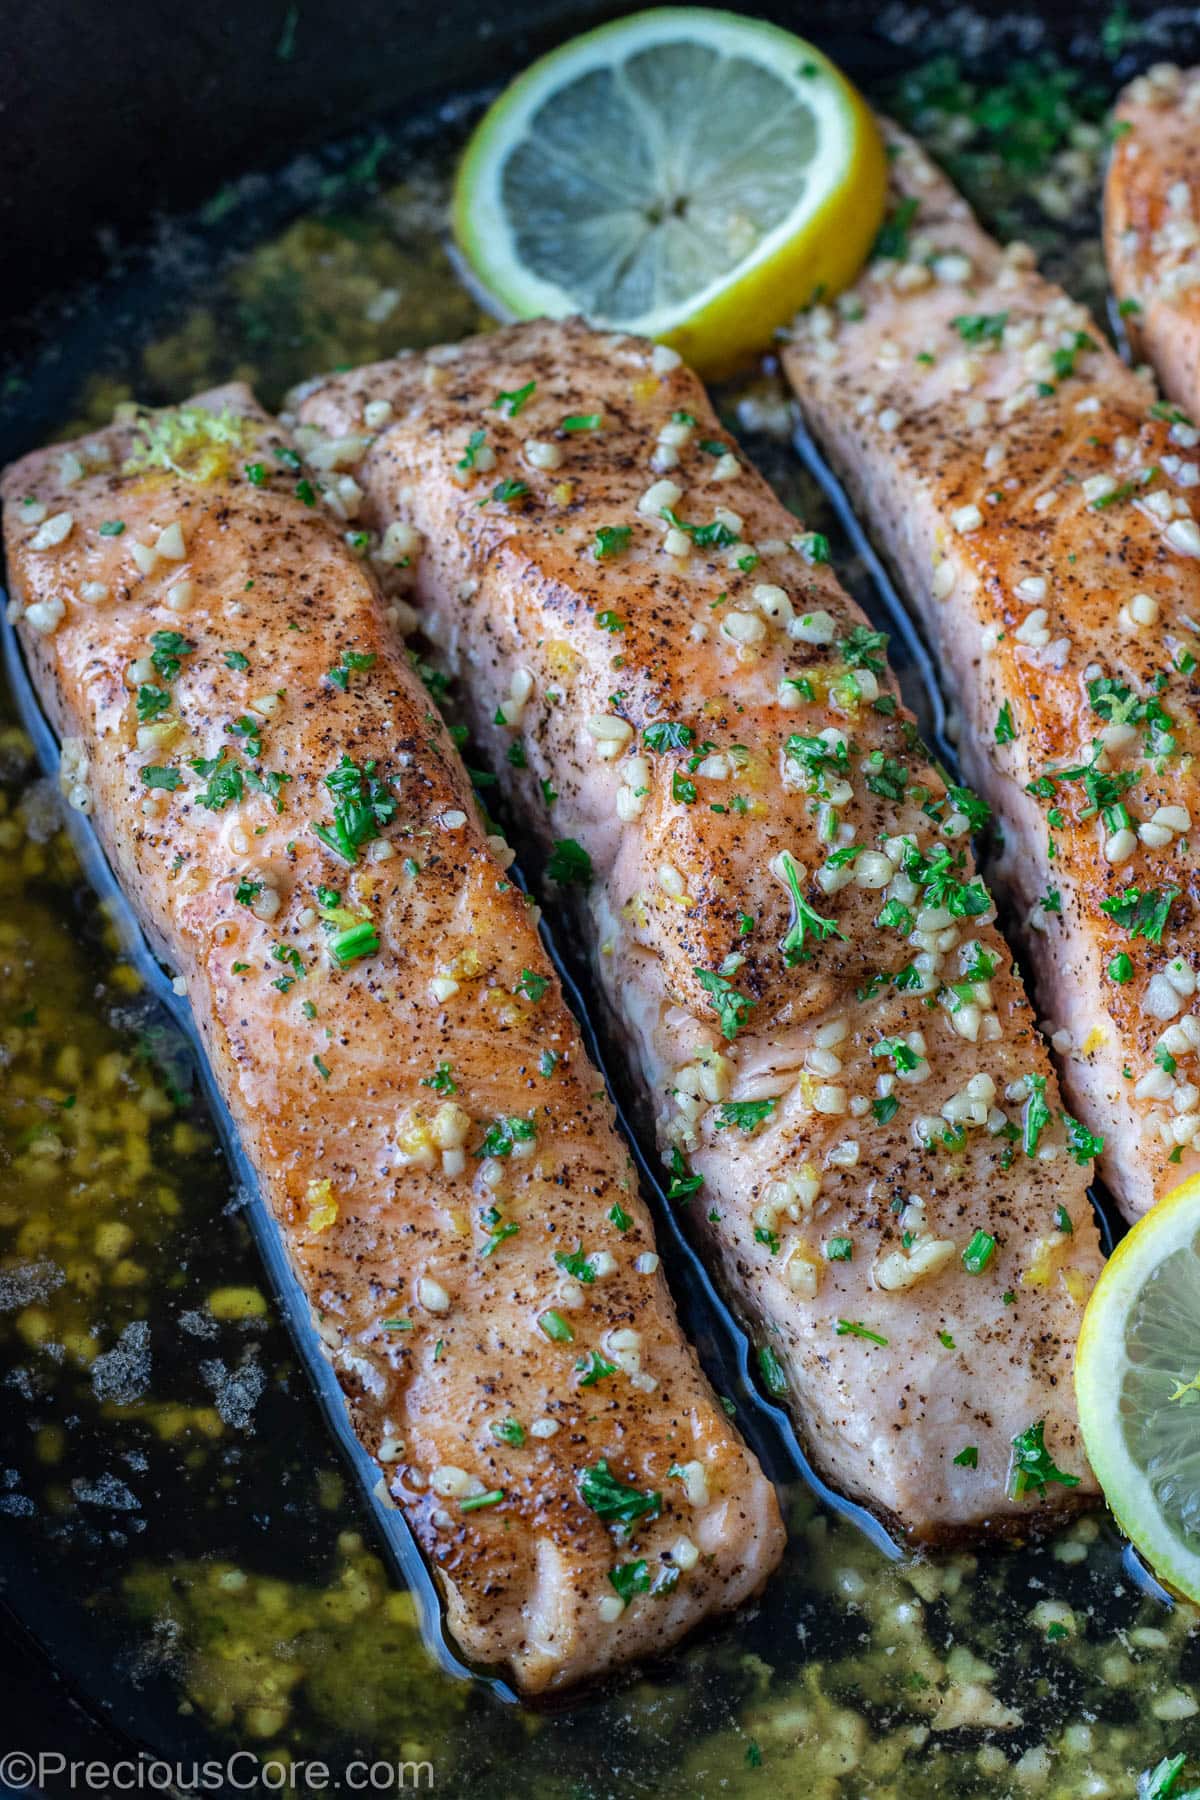 Lemon butter salmon in pan garnished with parsley and lemon slices.